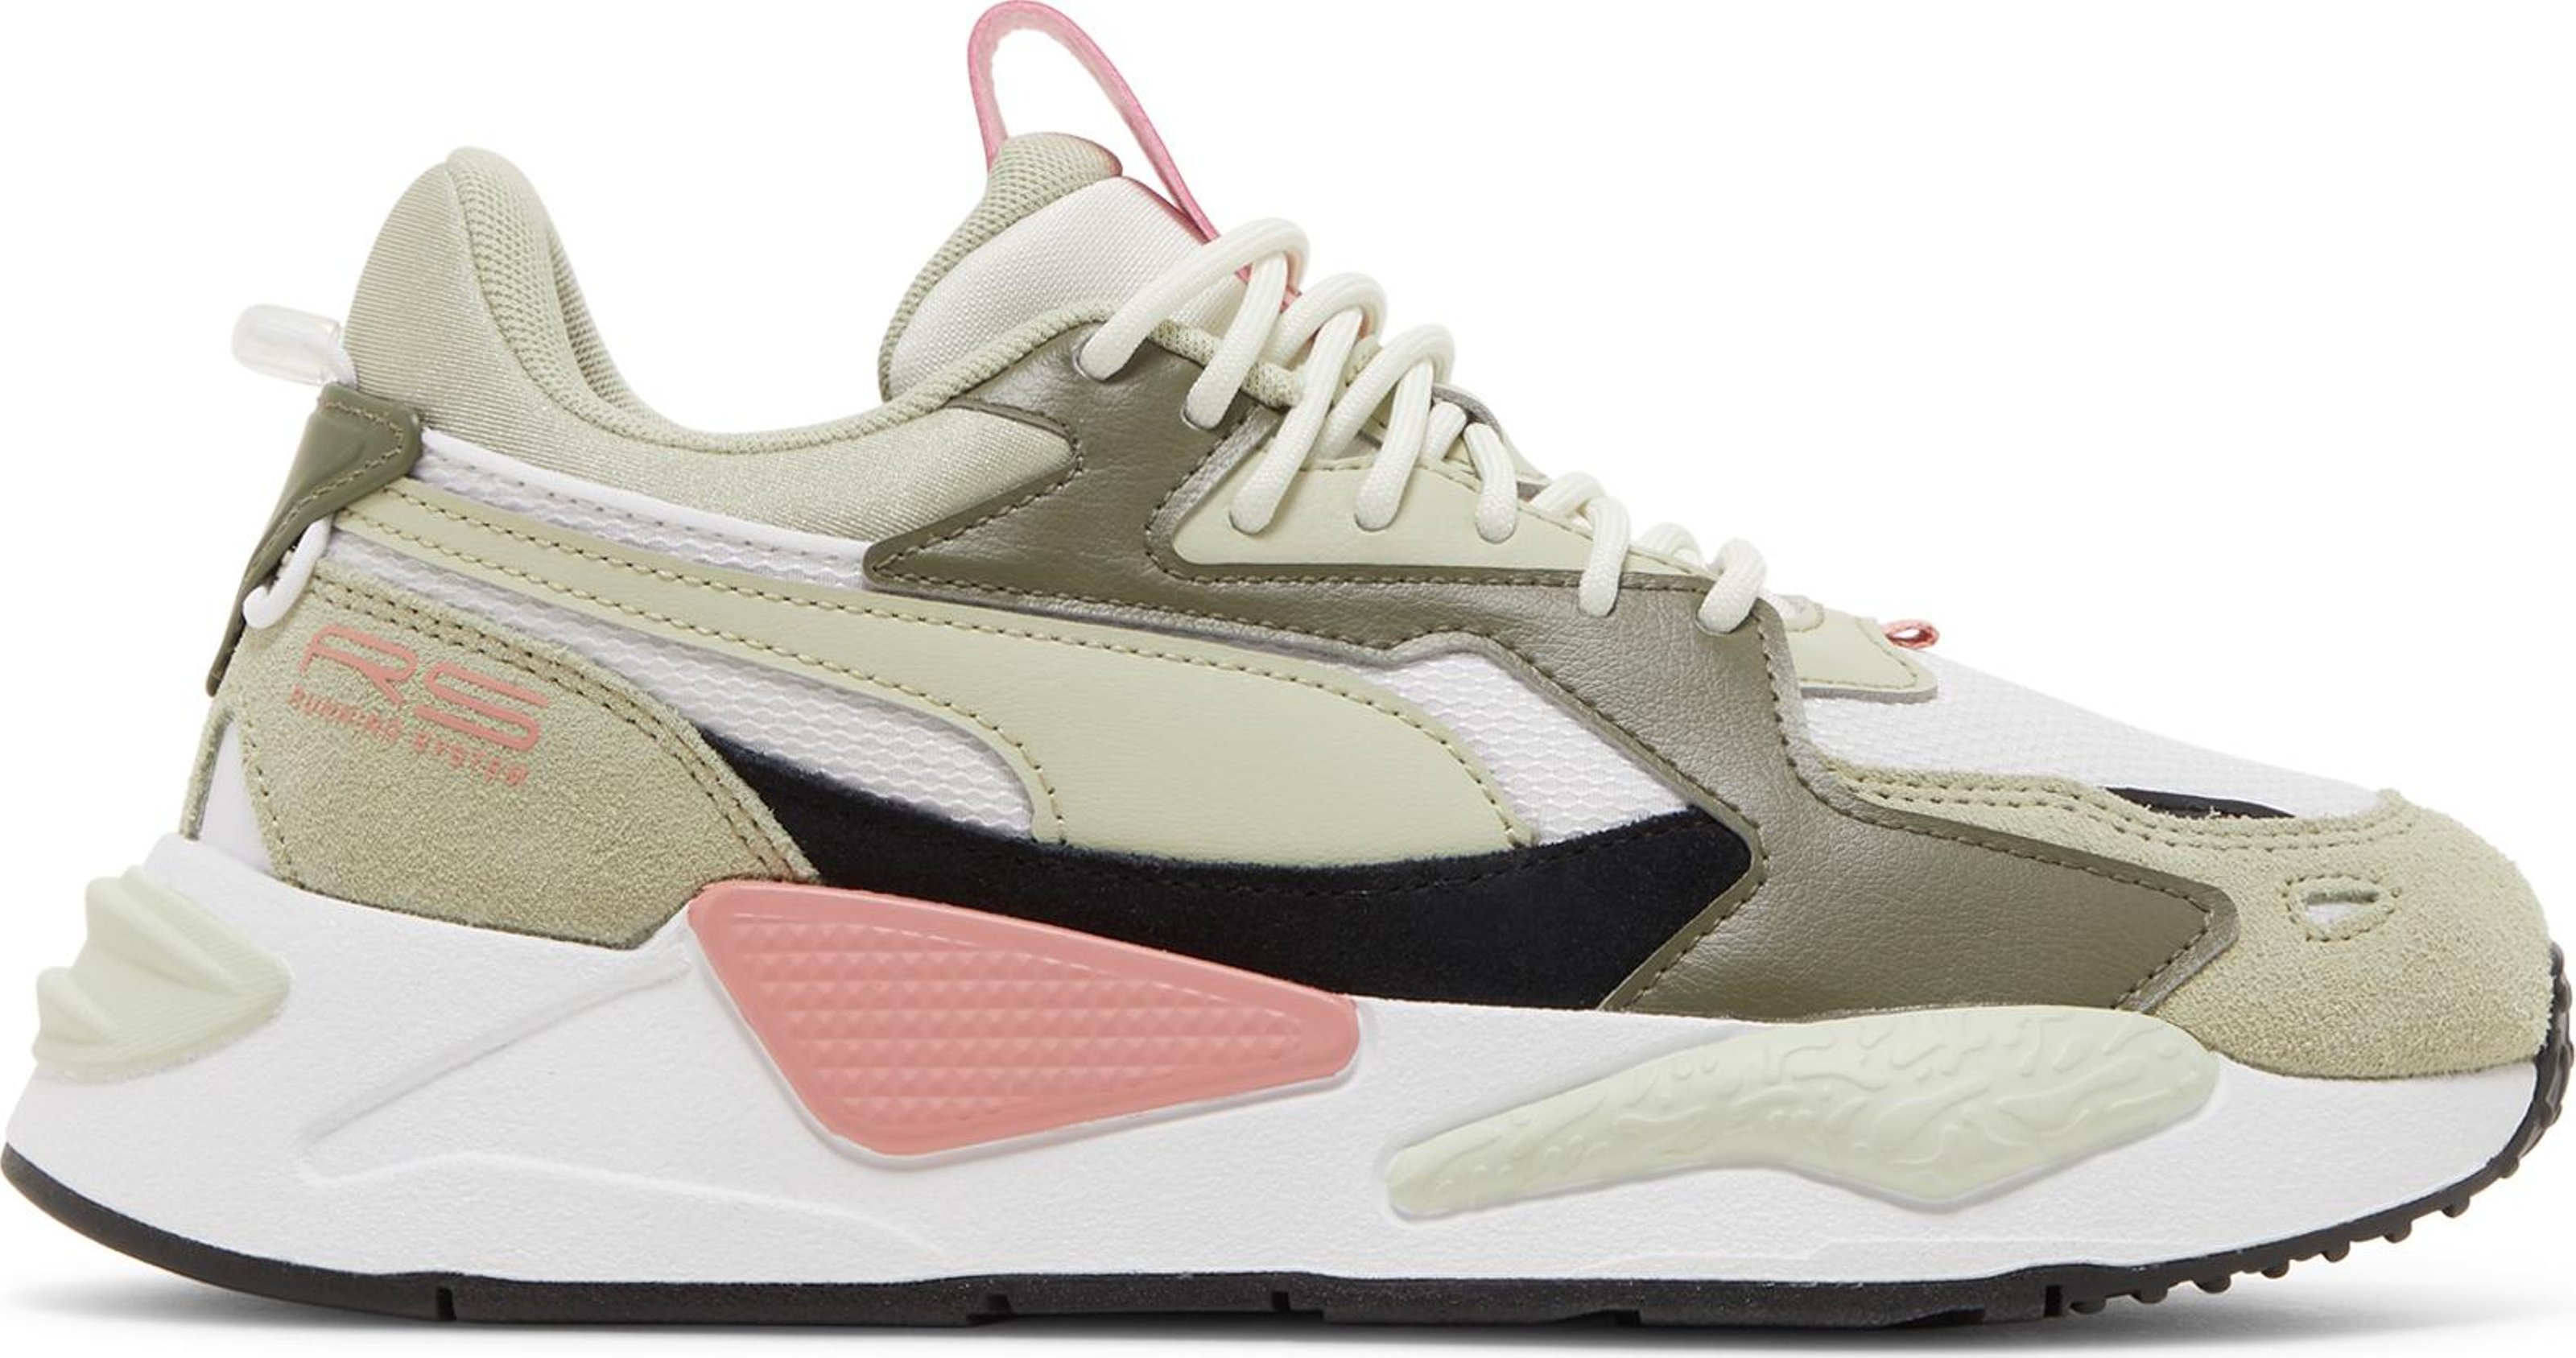 Buy Wmns RS-Z 'Reinvent - Spring Moss' - 383219 03 - Green | GOAT IT